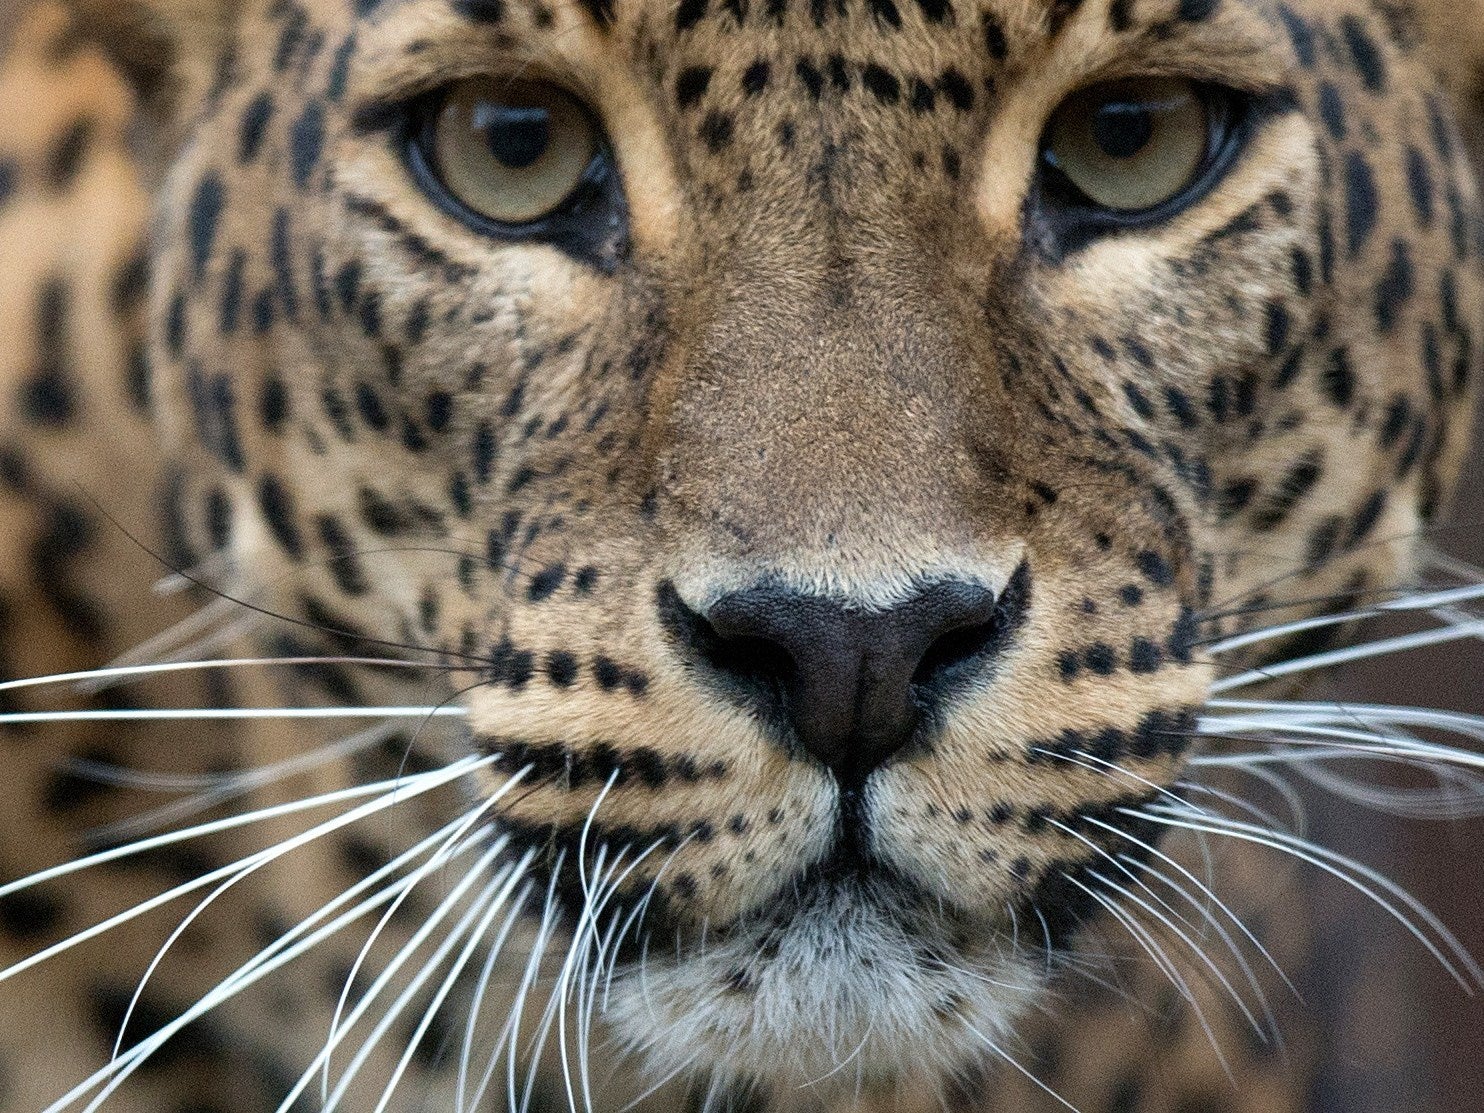 Five jaguar are reported to have been illegally hunted in Colombia, South America